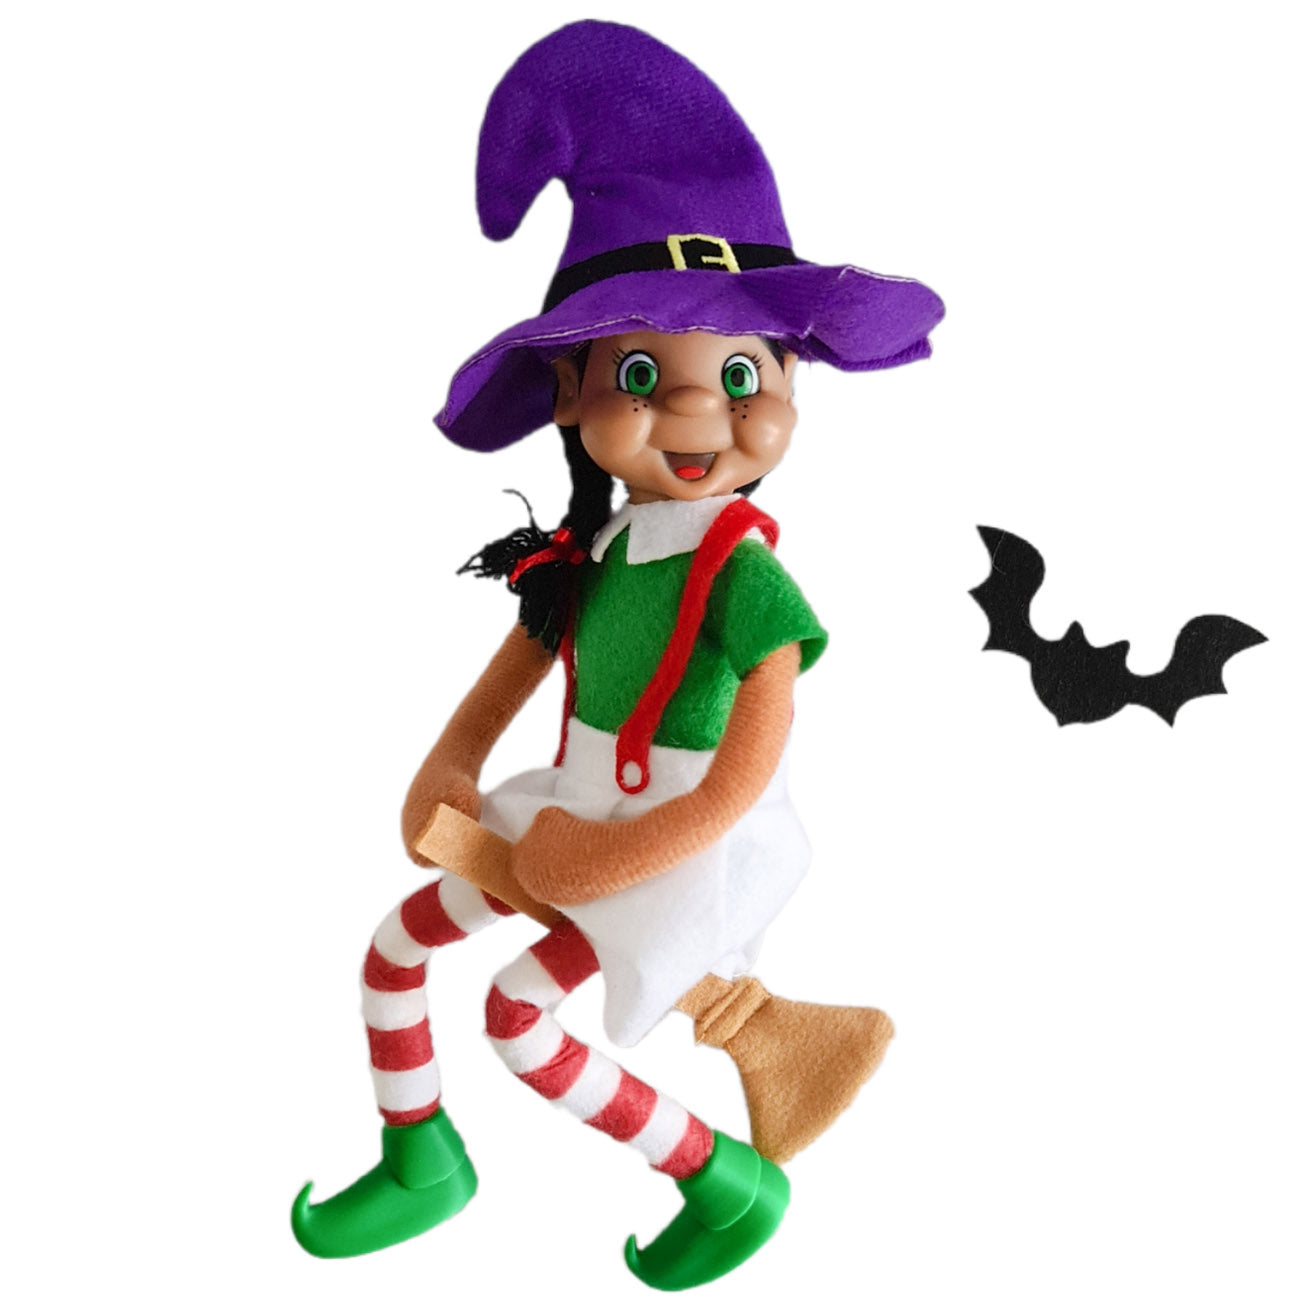 Elf Witch costume riding a broom stick with a pet bat